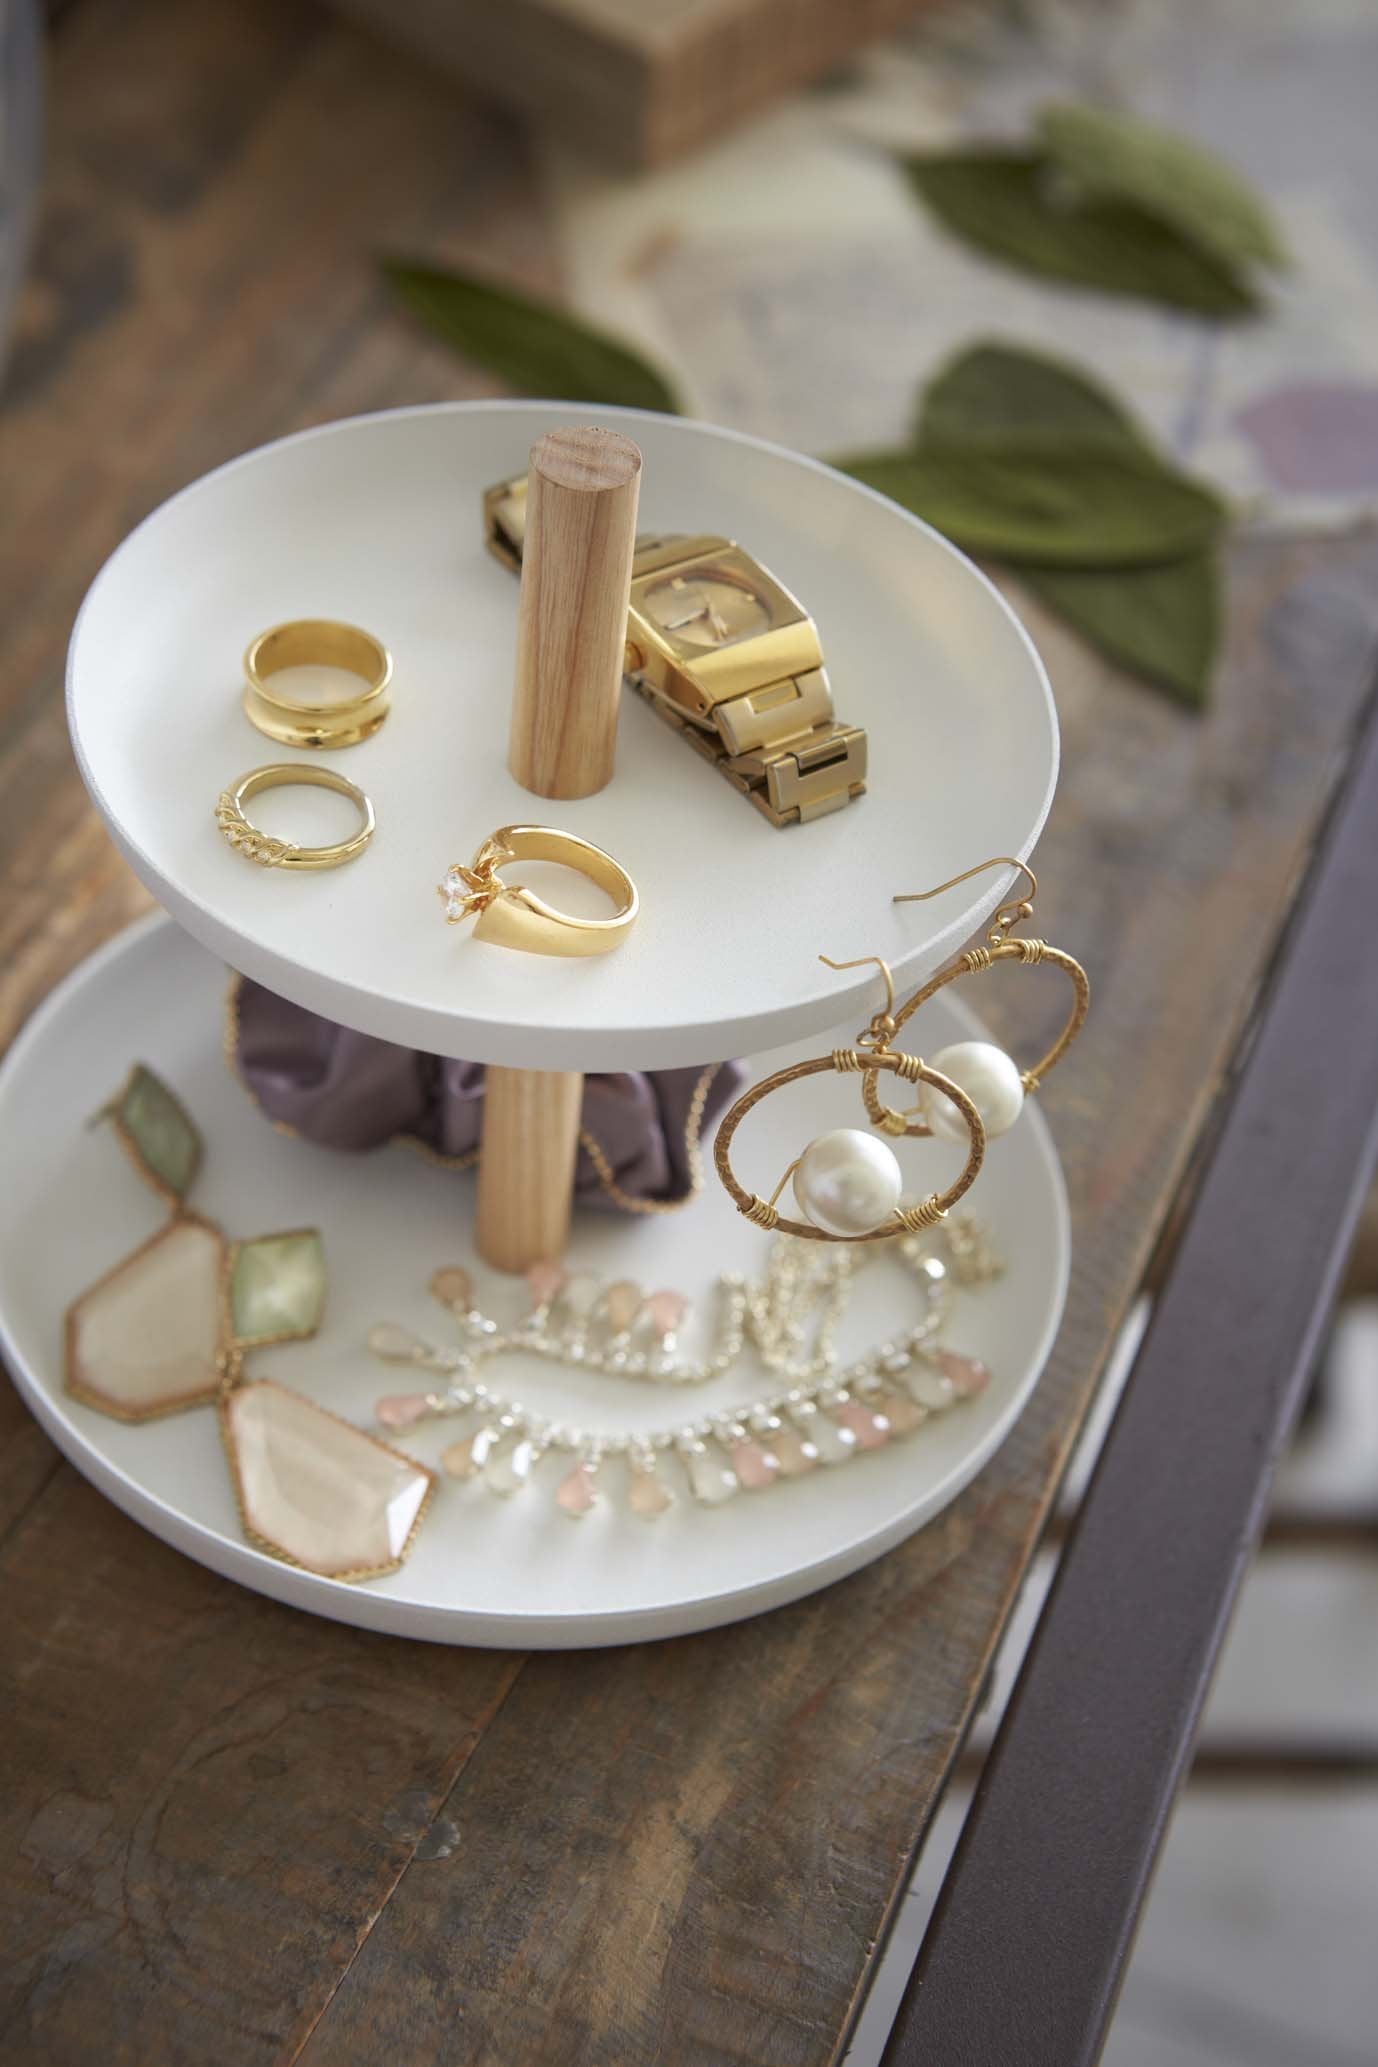 A tiered accessory tray by Yamazaki filled with accessories sitting on a desk.